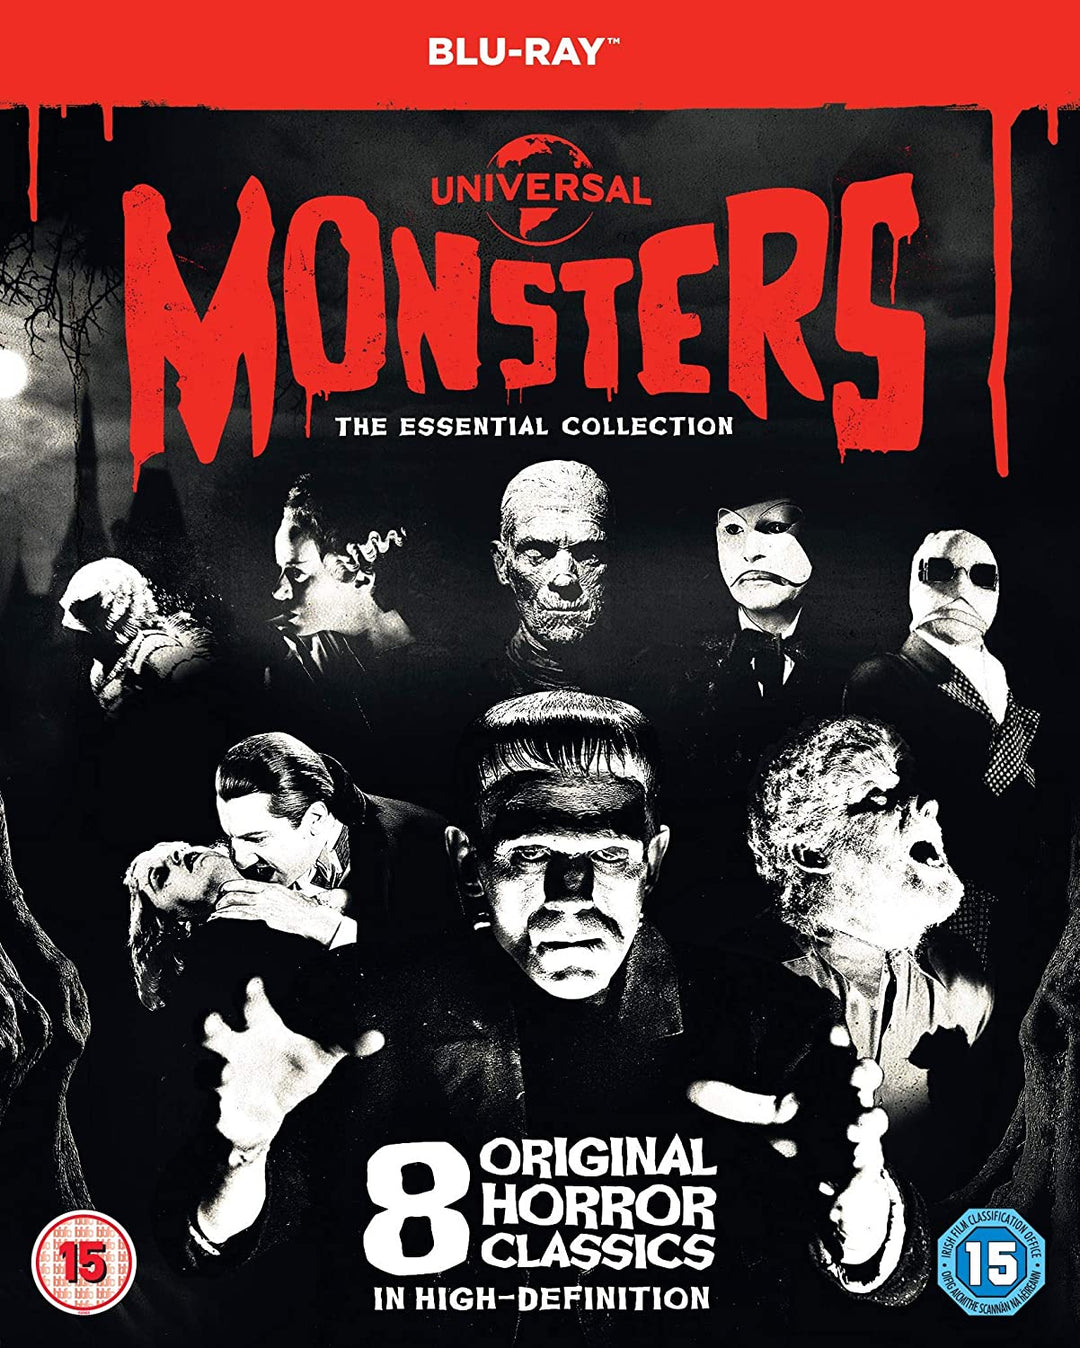 Universal Classic Monsters – The Essential Collection [Blu-ray]